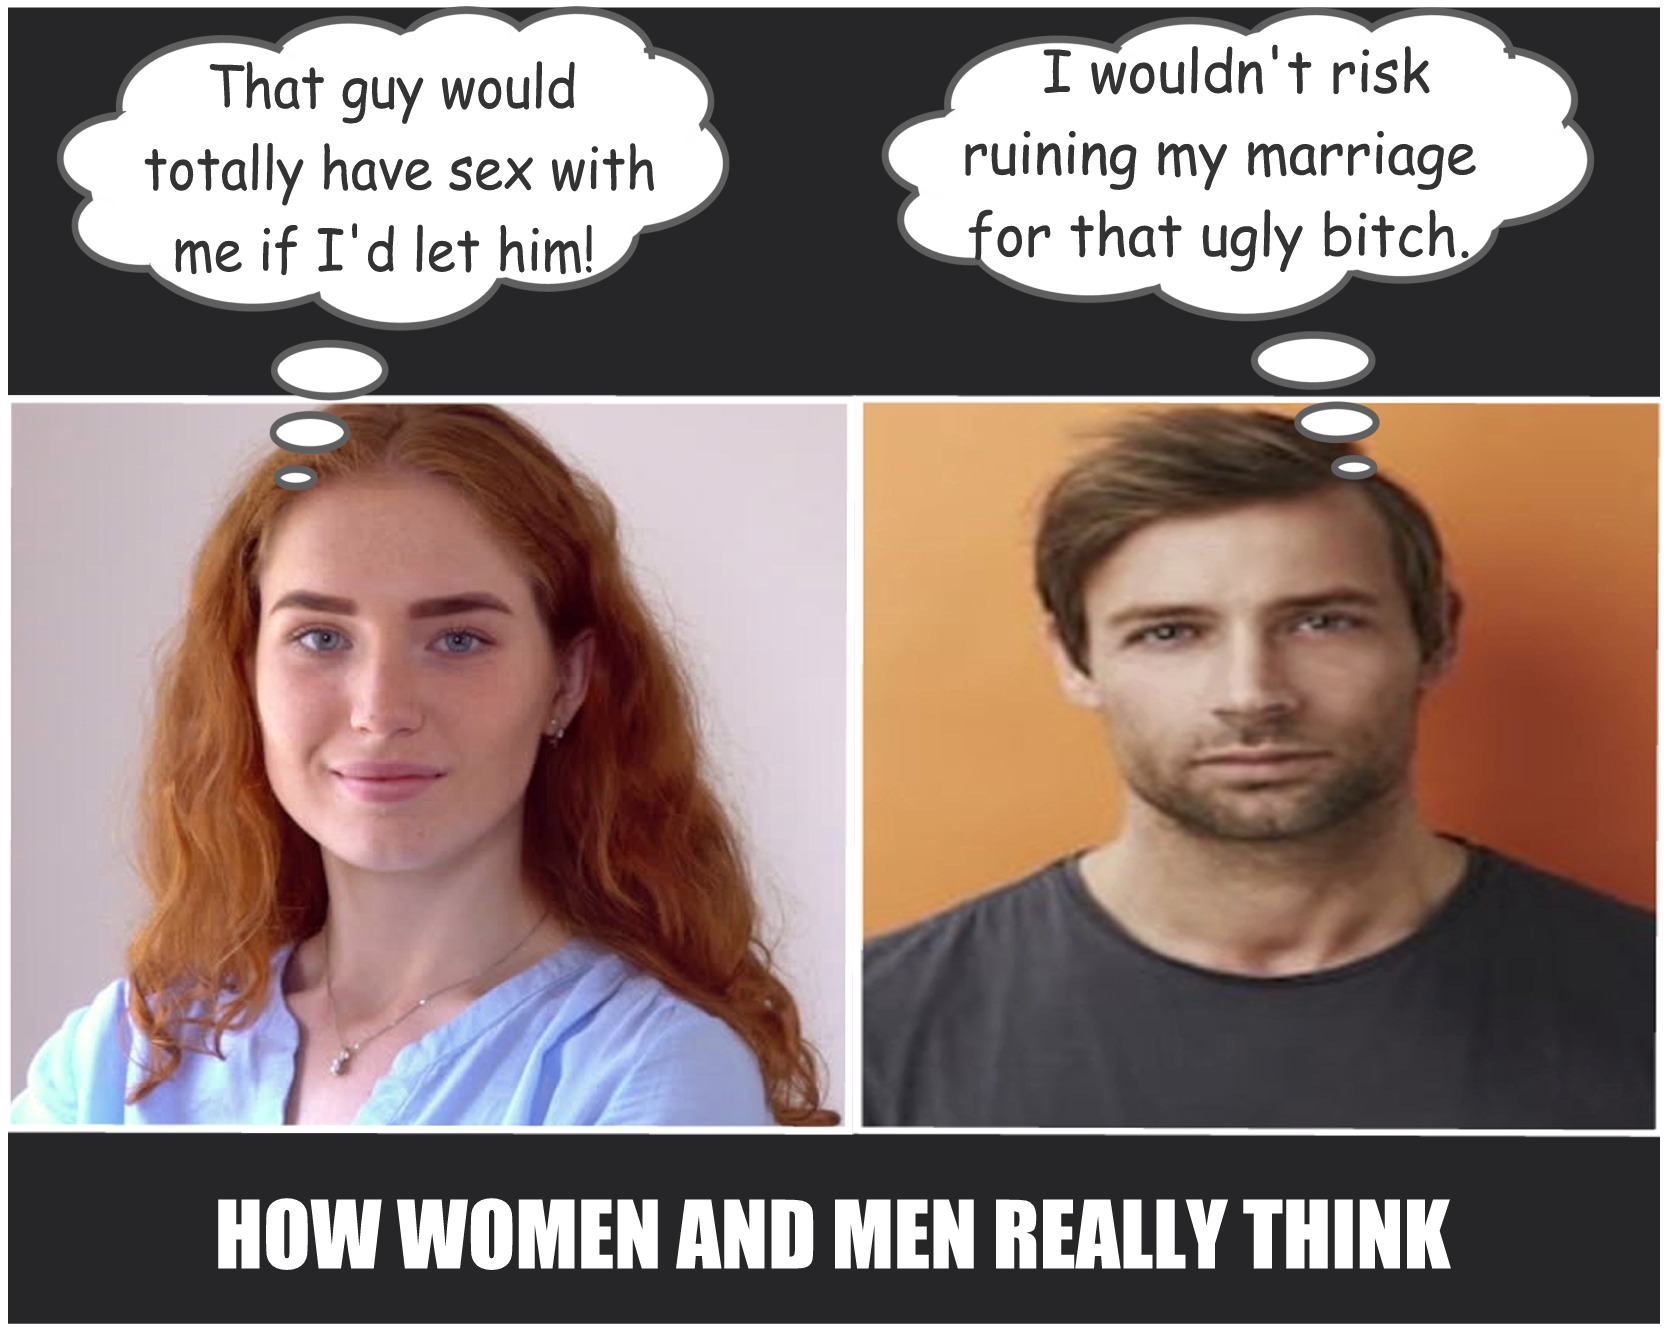 photo caption - That guy would totally have sex with me if I'd let him! I wouldn't risk ruining my marriage for that ugly bitch. How Women And Men Really Think